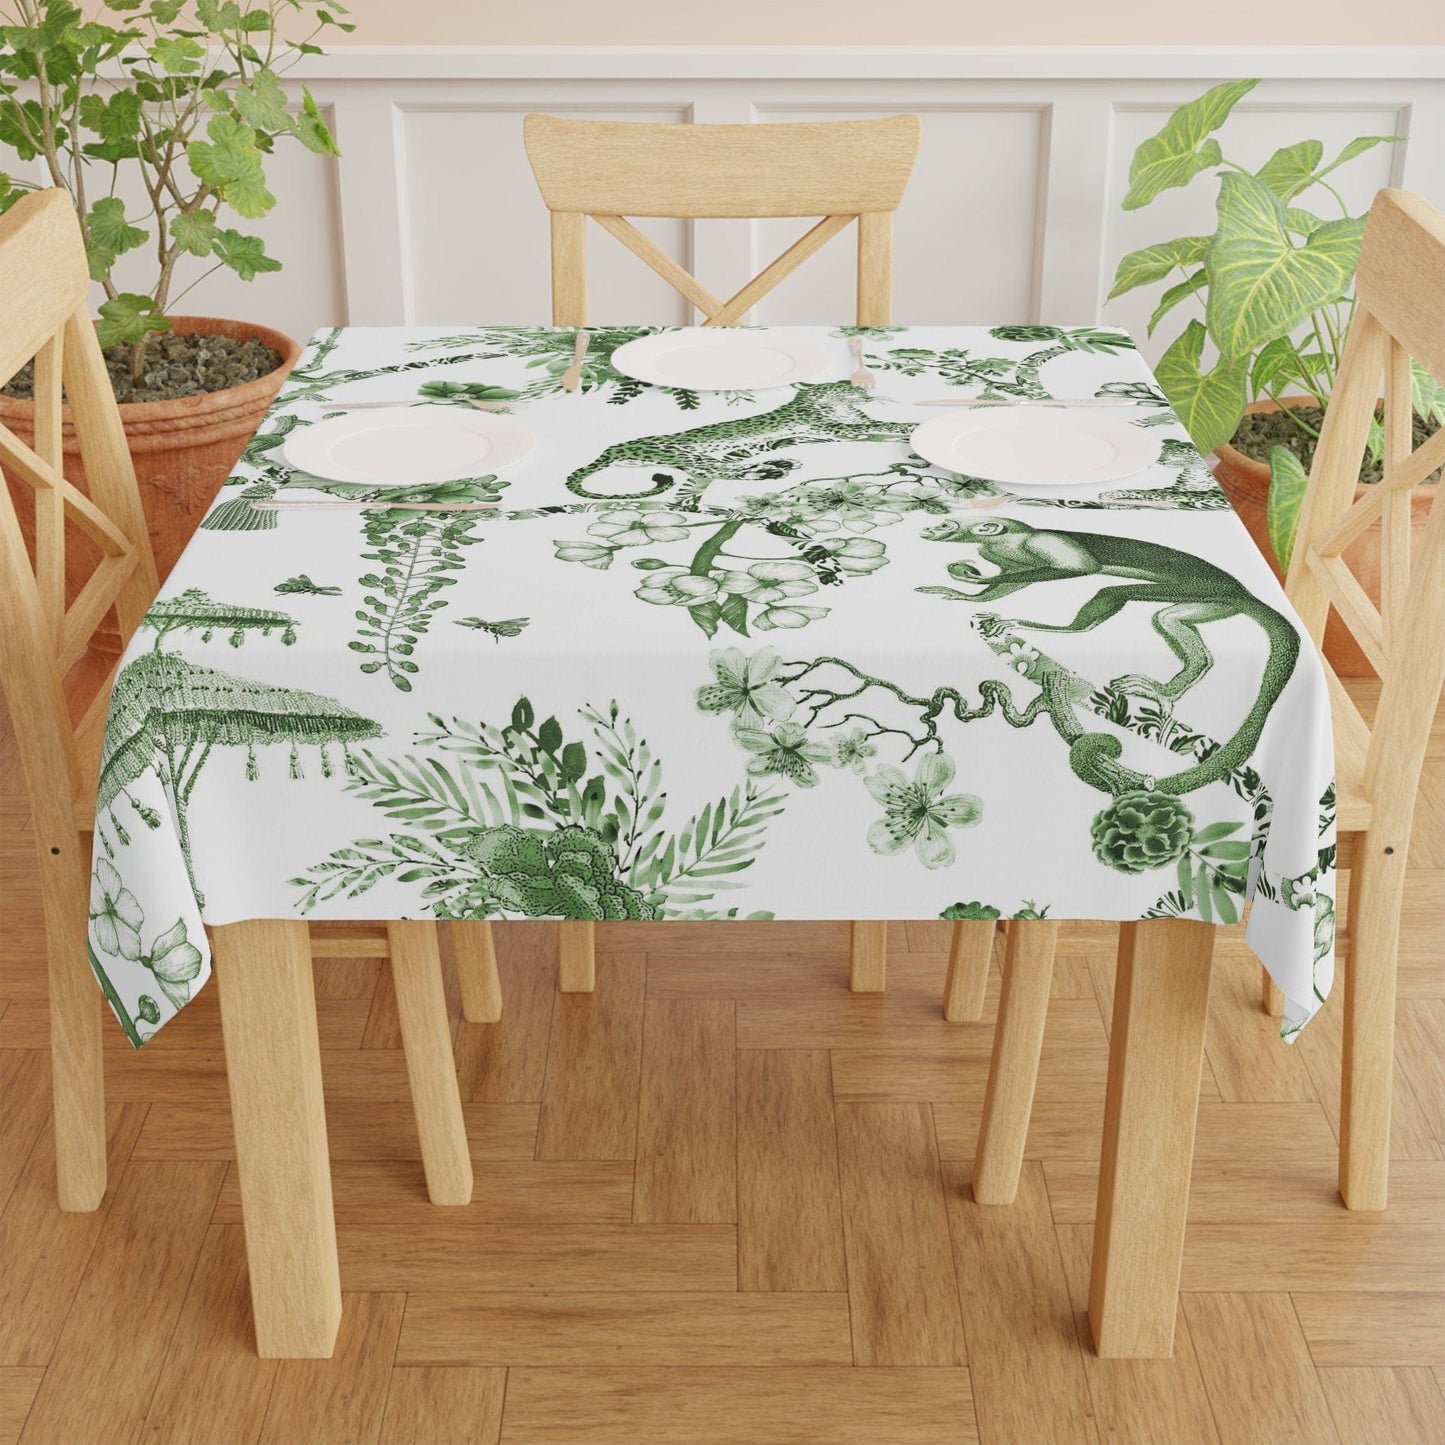 Kate McEnroe New York Chinoiserie Botanical Toile Tablecloth, Floral Green, White Chinoiserie Jungle, Country Farmhouse Table Decor, Grandmillenial Kitchen Decor Tablecloths 20990366732955140771